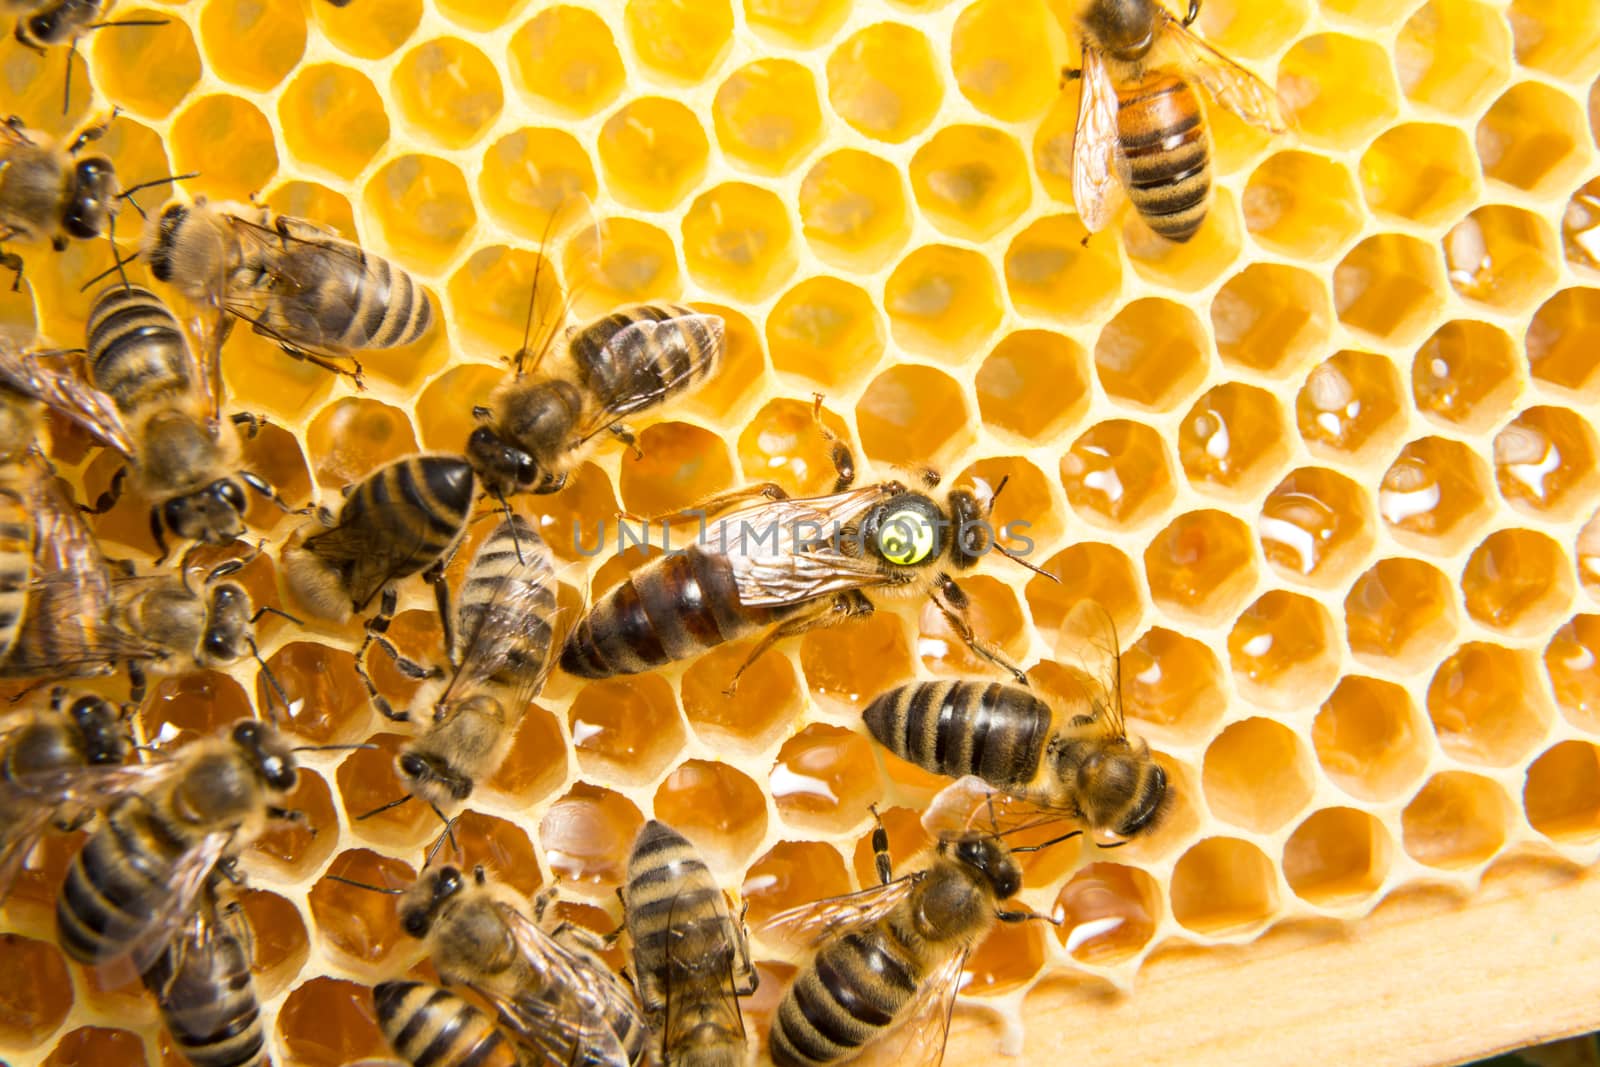 Queen bee in a beehive laying eggs supported by worker bees